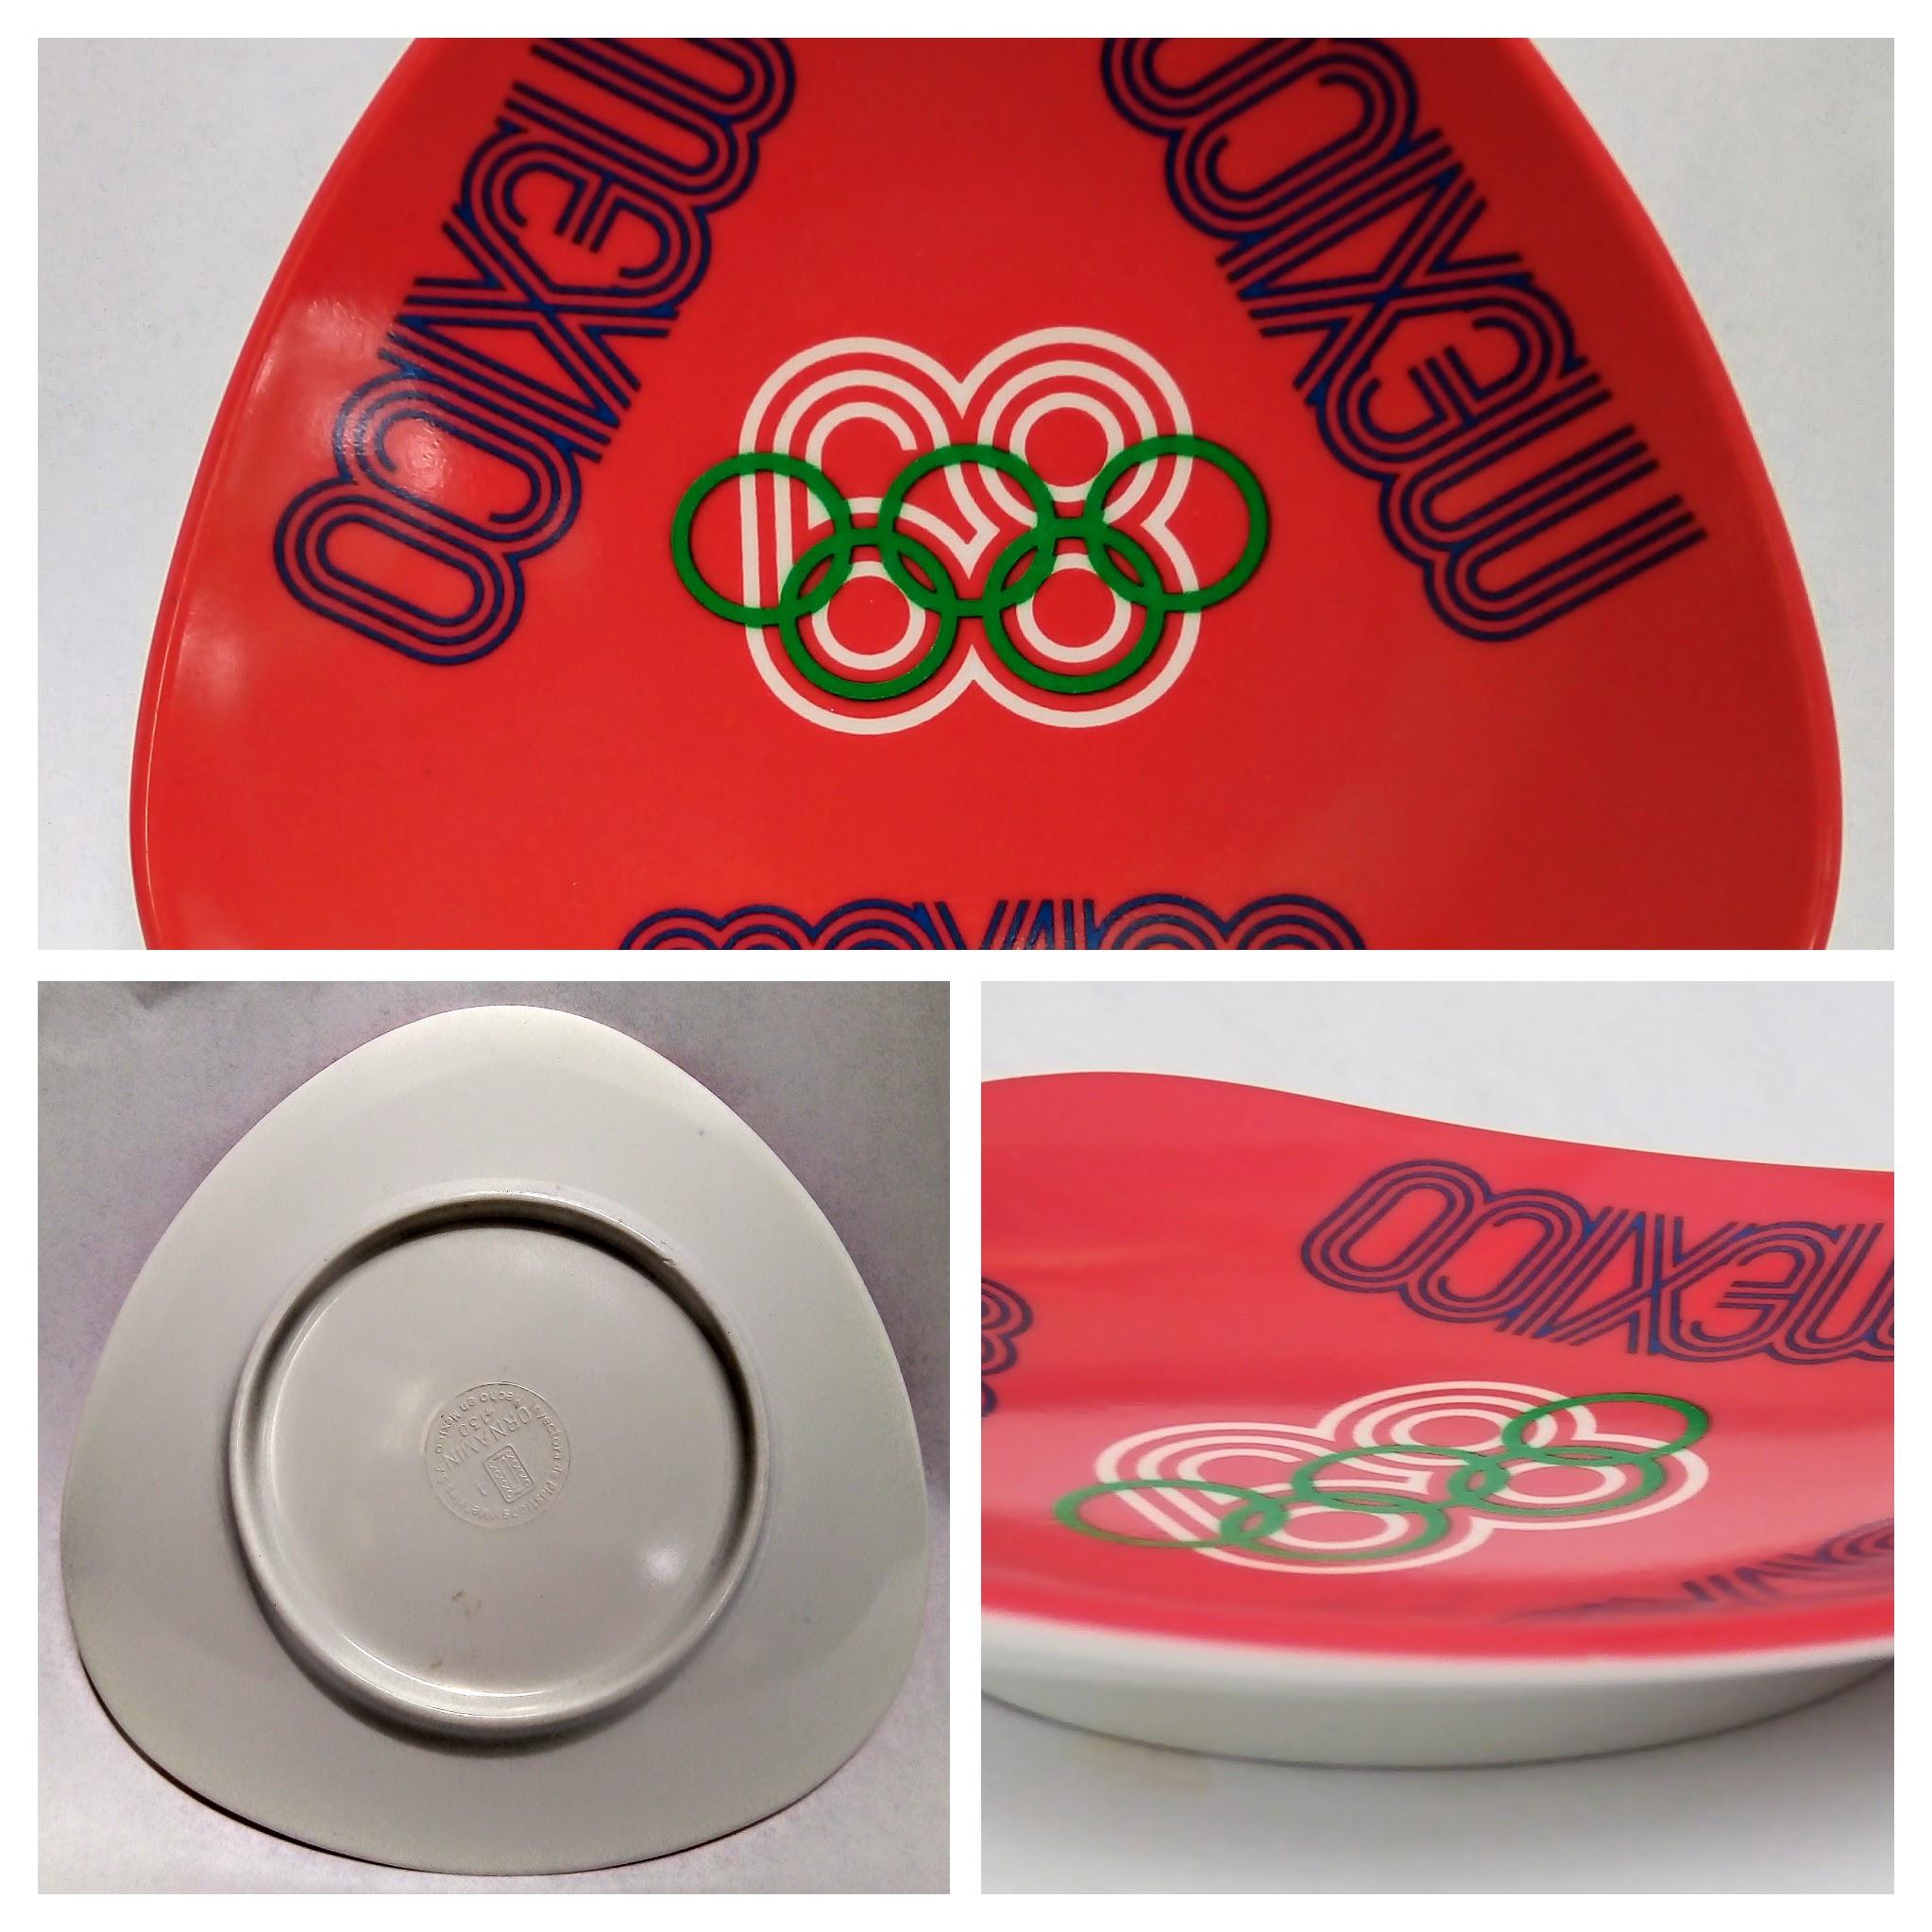 Organic Modern Amazing Set of 5 Original Ashtrays from Mexico68 Olympic Games in Striking Color